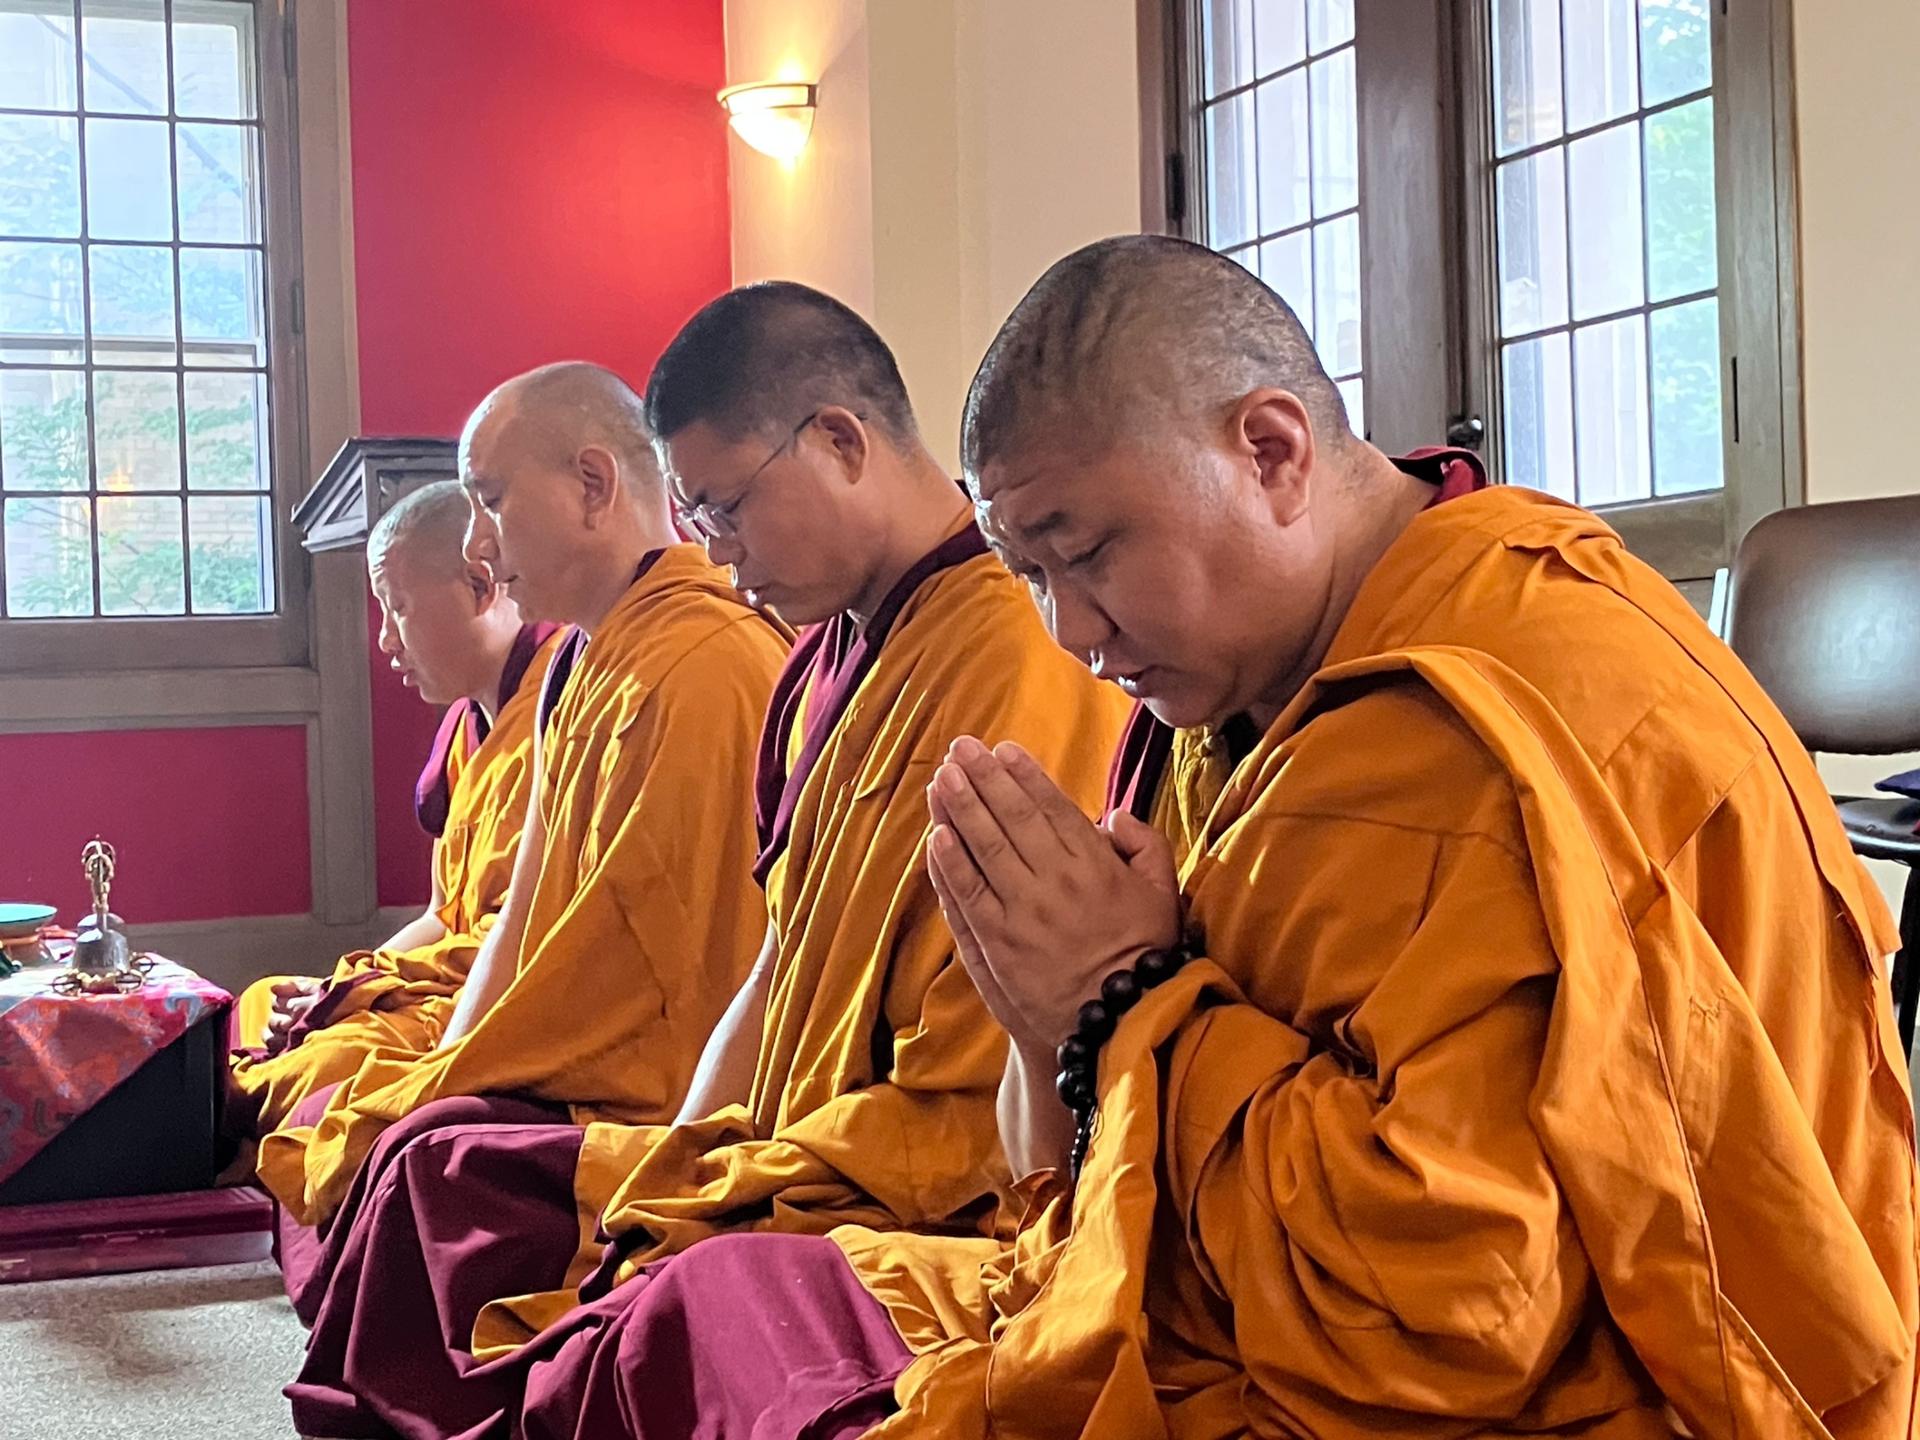 The traveling monks open each day with chanting and prayers facing the mandala-in-progress.